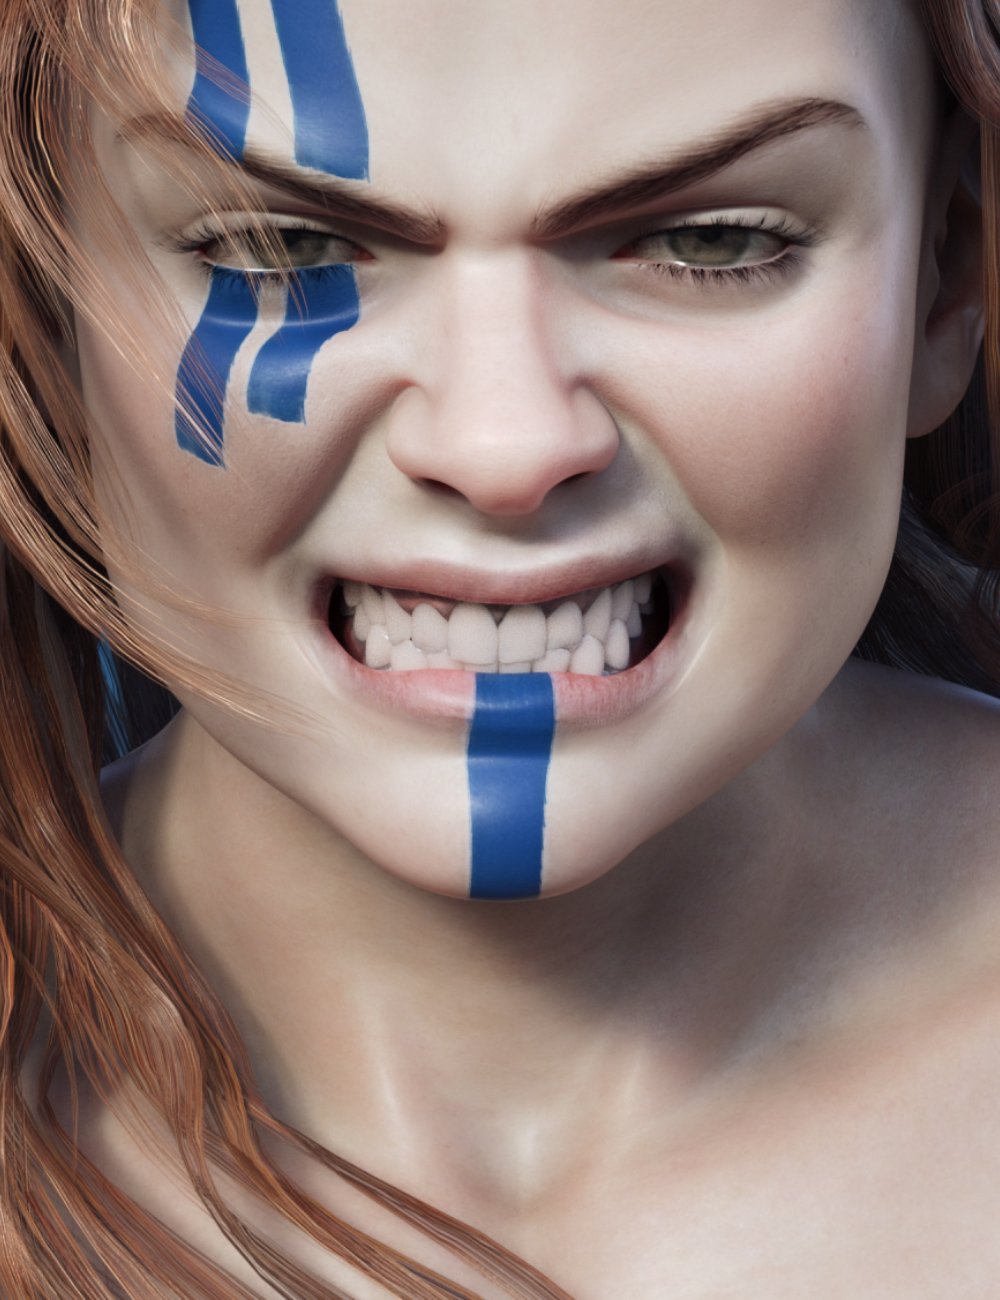 Viking Warrior Expressive for Freja 8 and Genesis 8 Female by: Neikdian, 3D Models by Daz 3D